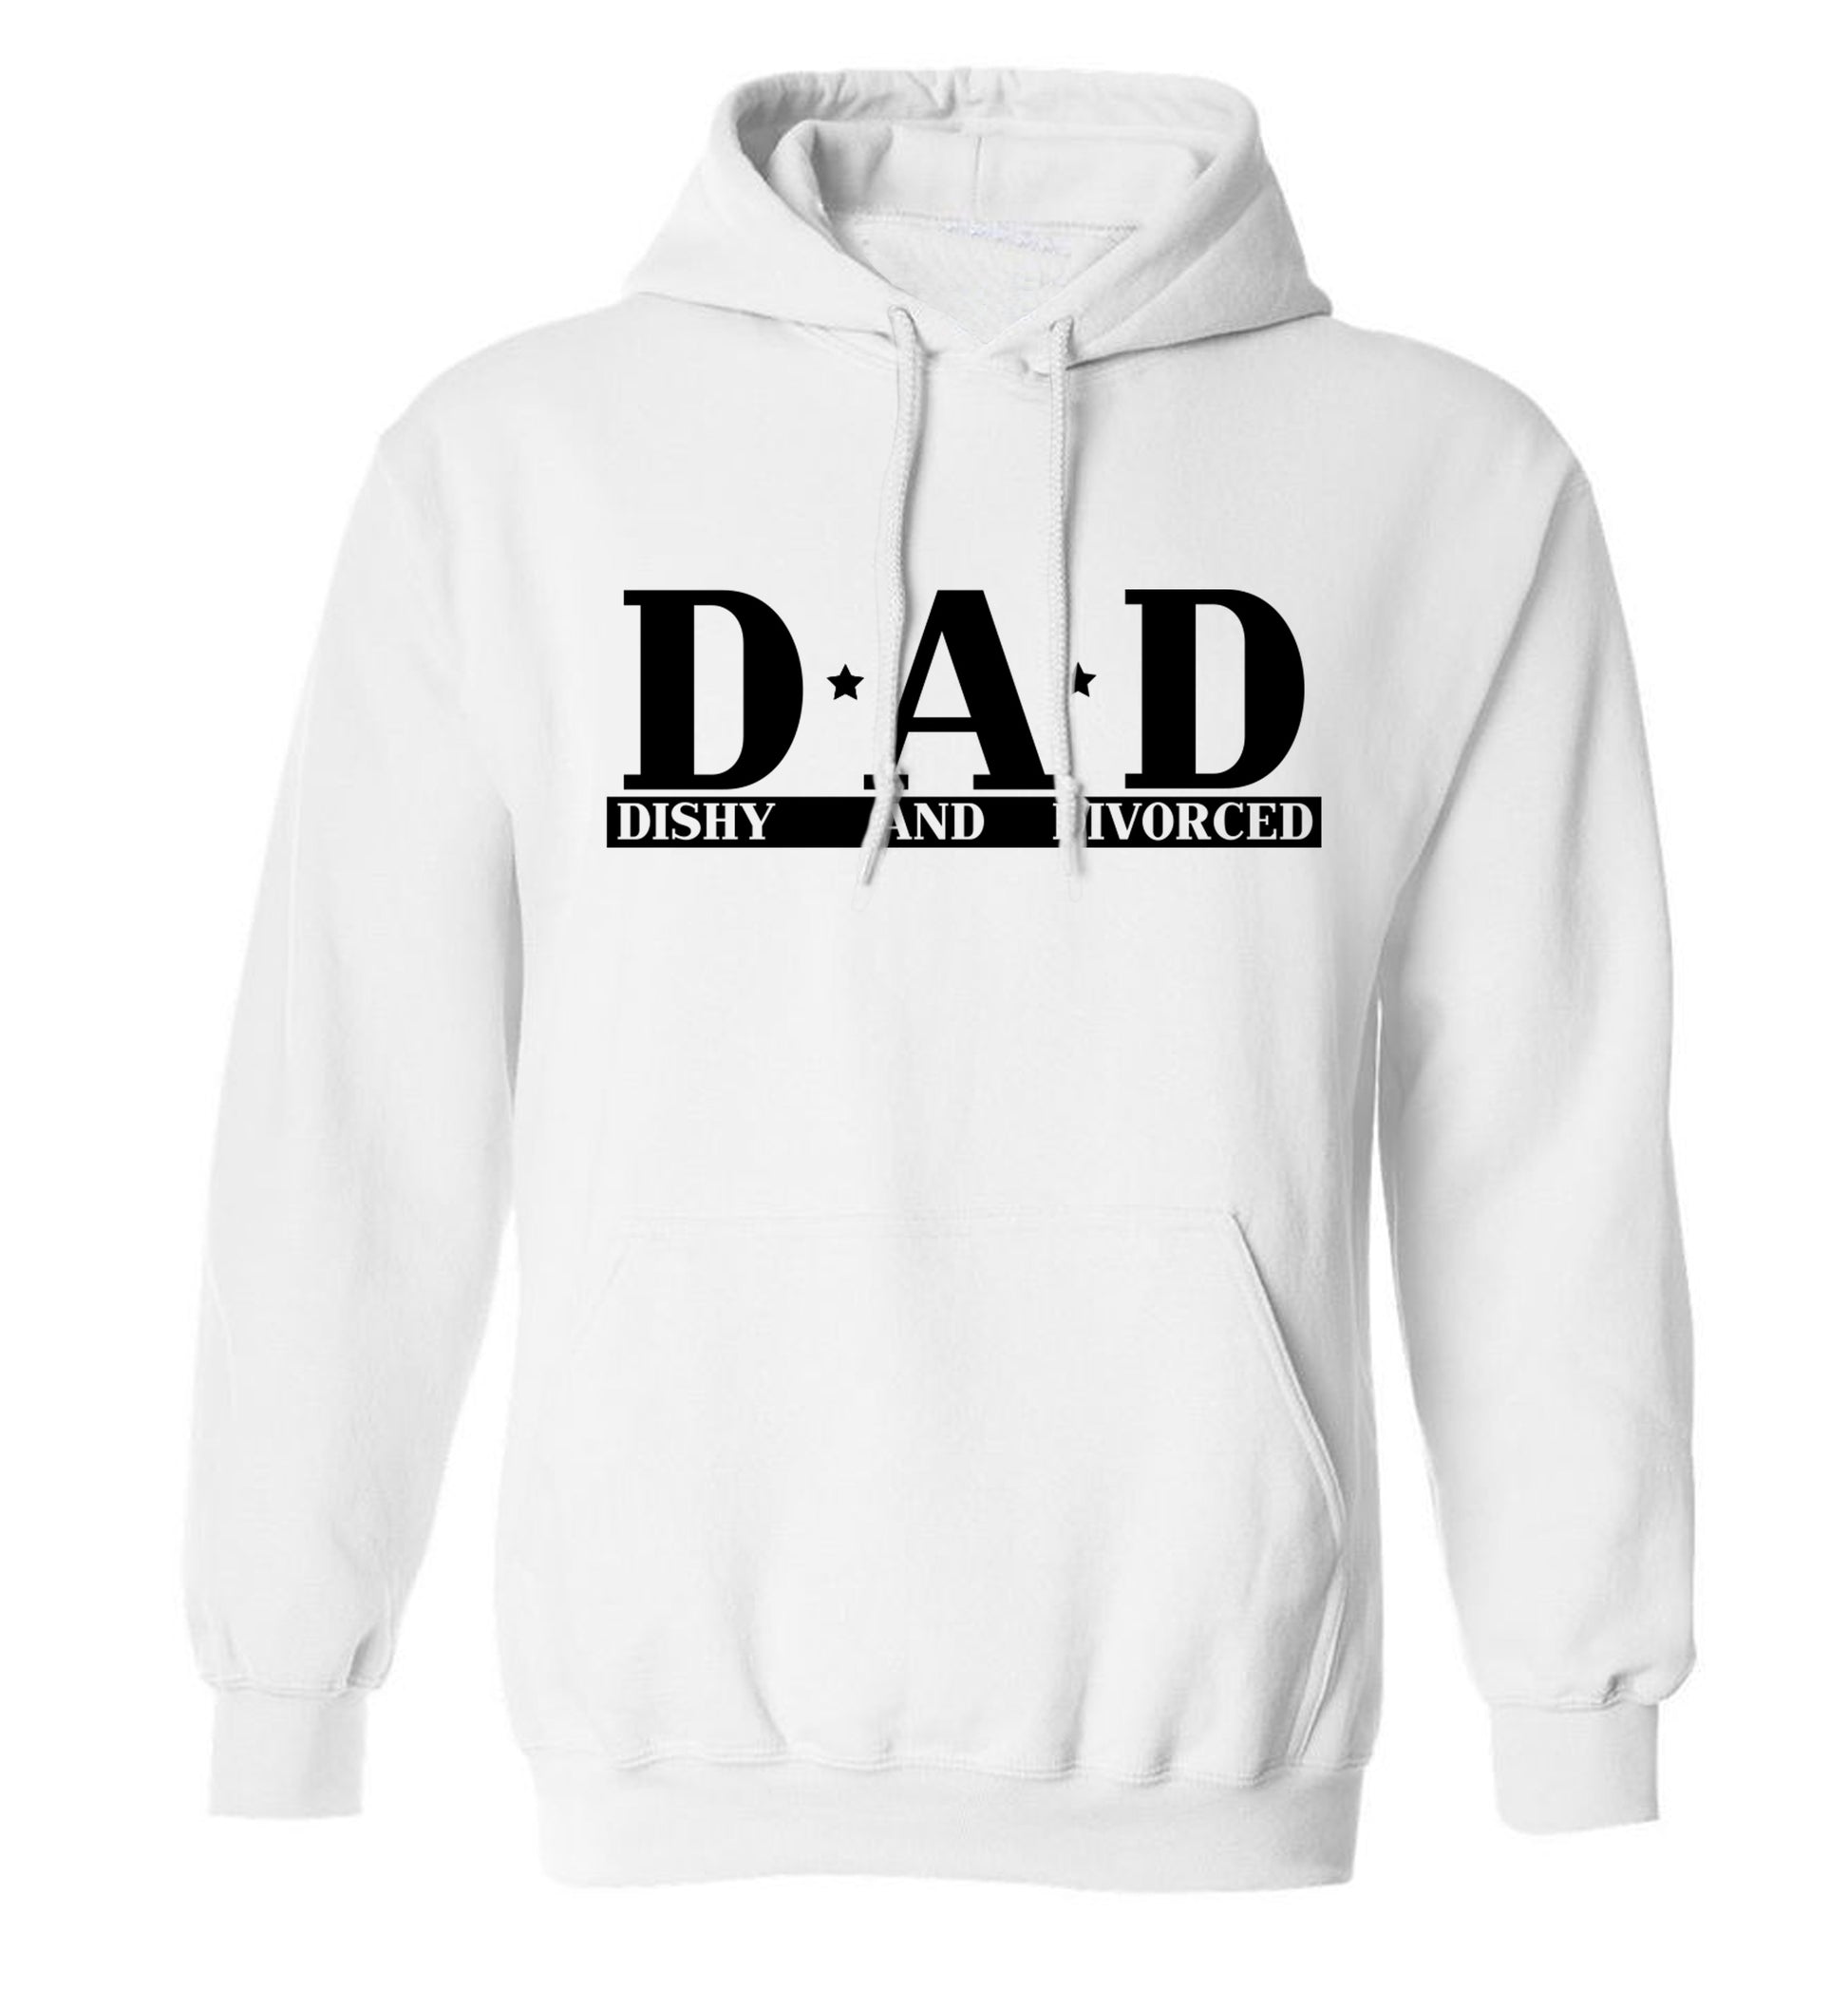 D.A.D meaning Dishy and Divorced adults unisex white hoodie 2XL